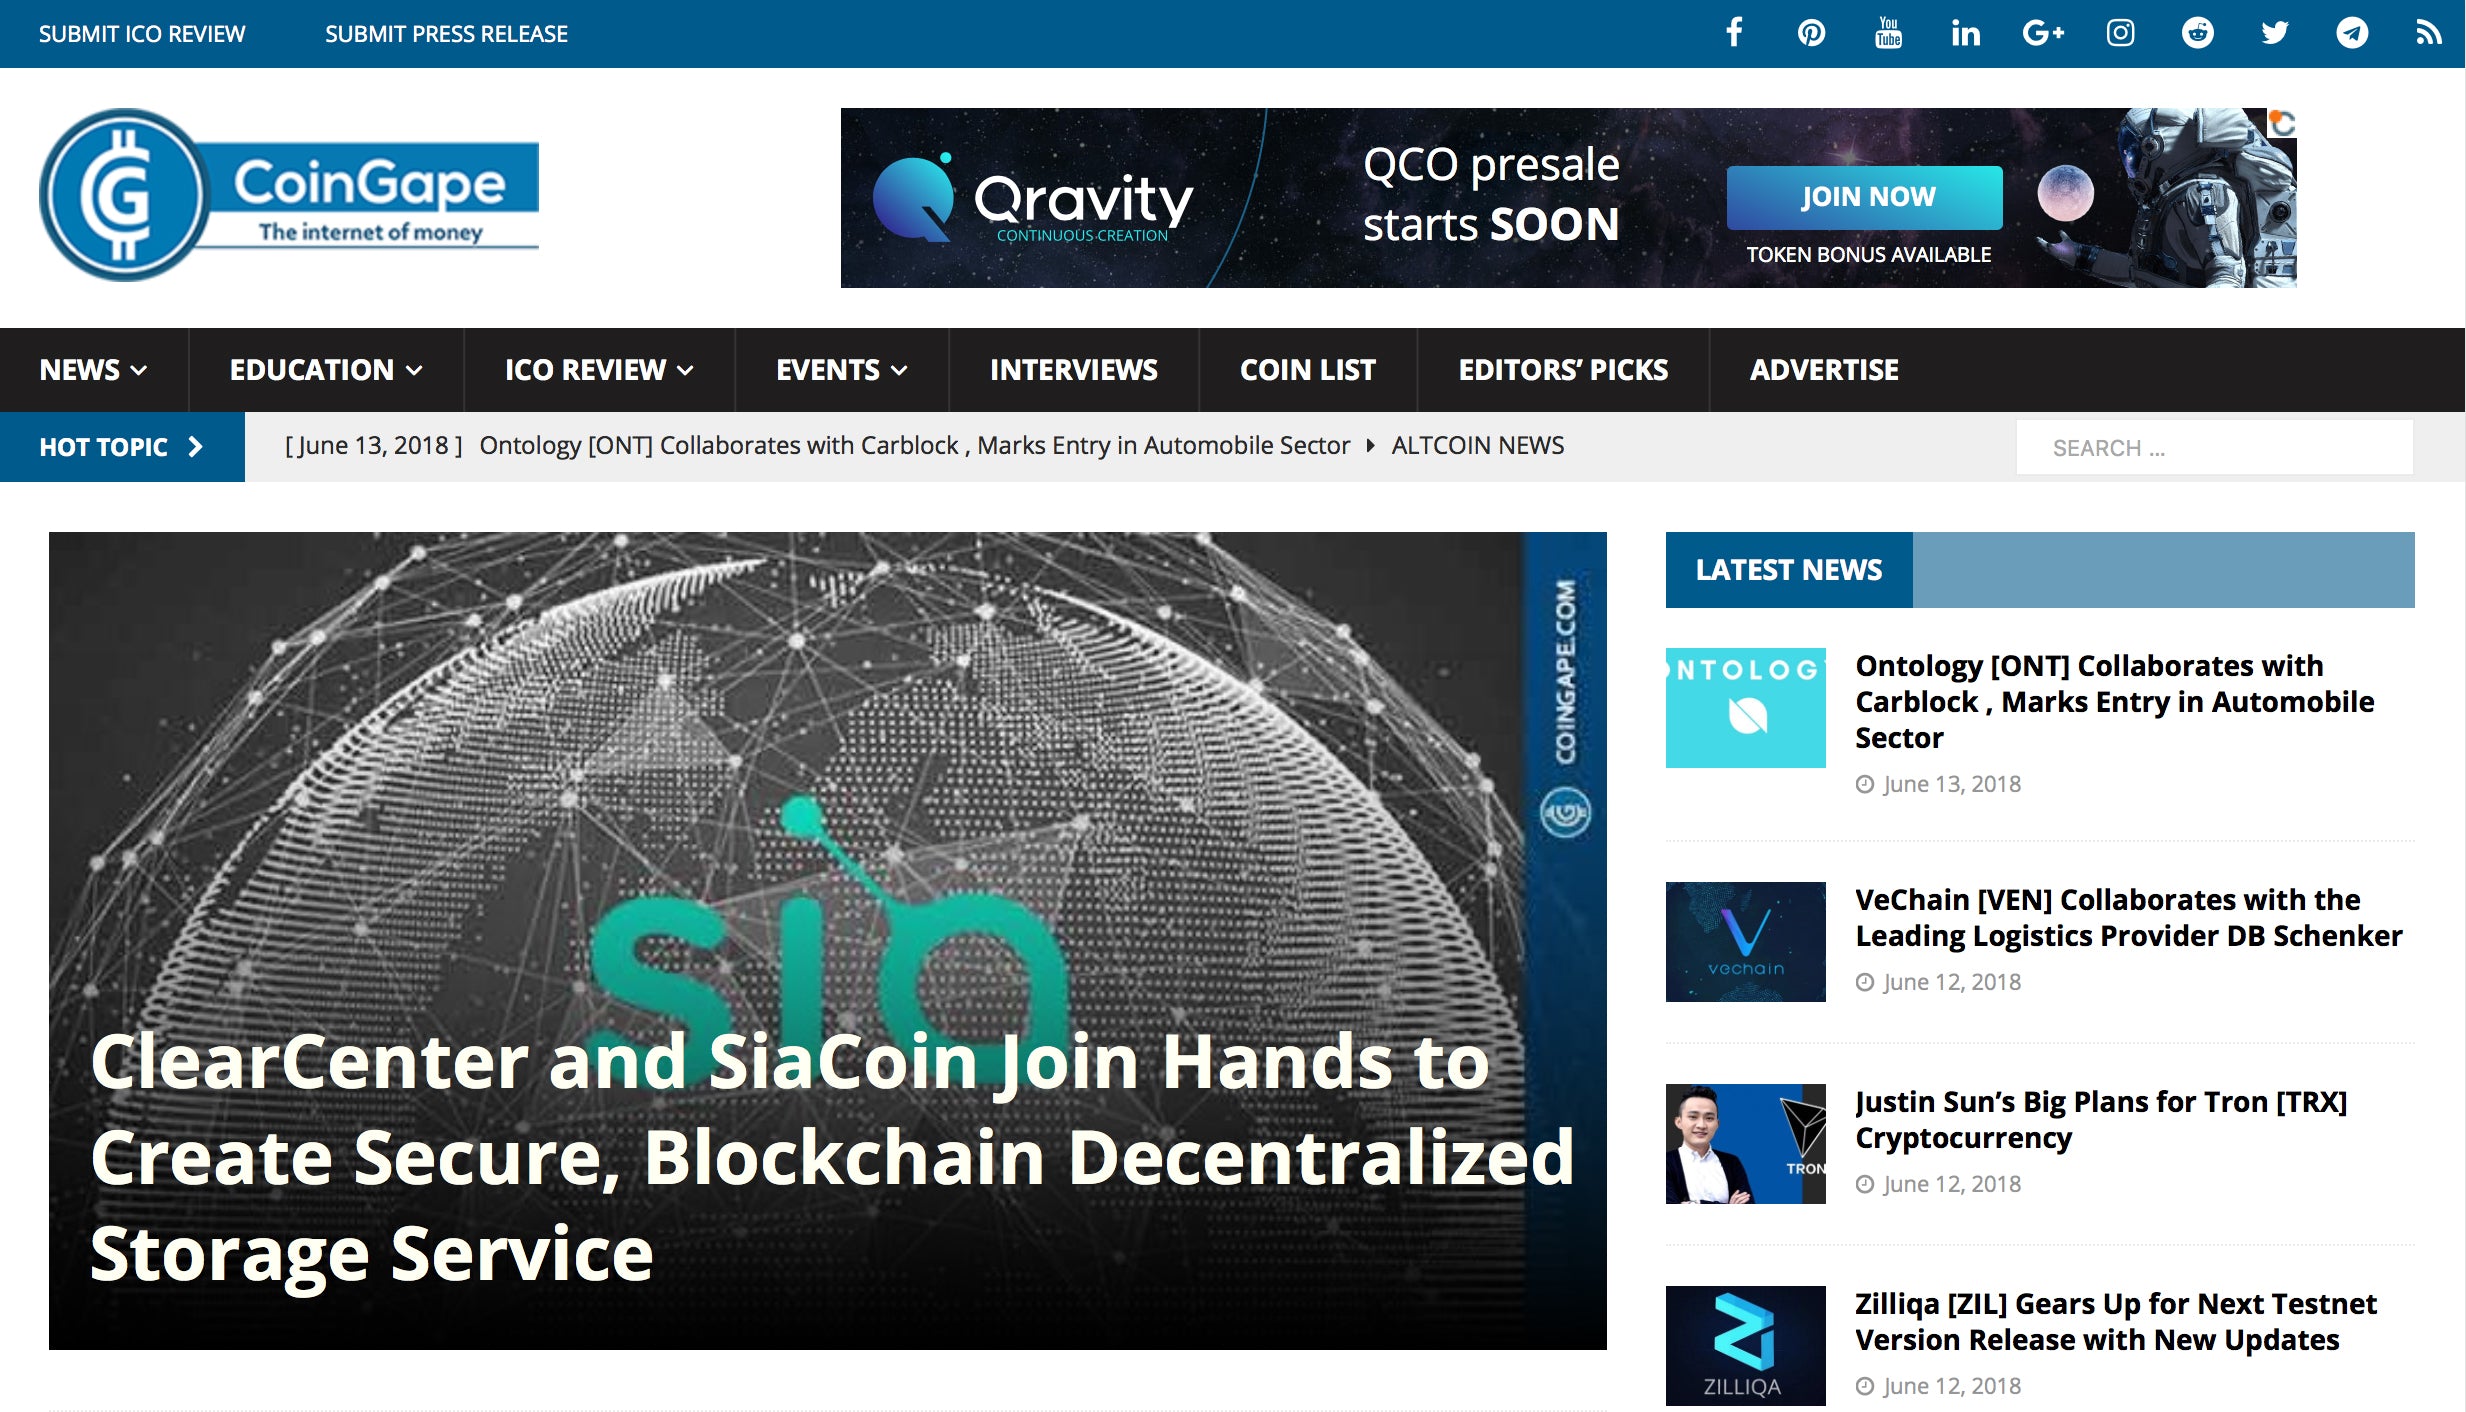 ClearCenter and SiaCoin Join Hands to Create Secure, Blockchain Decentralized Storage Service